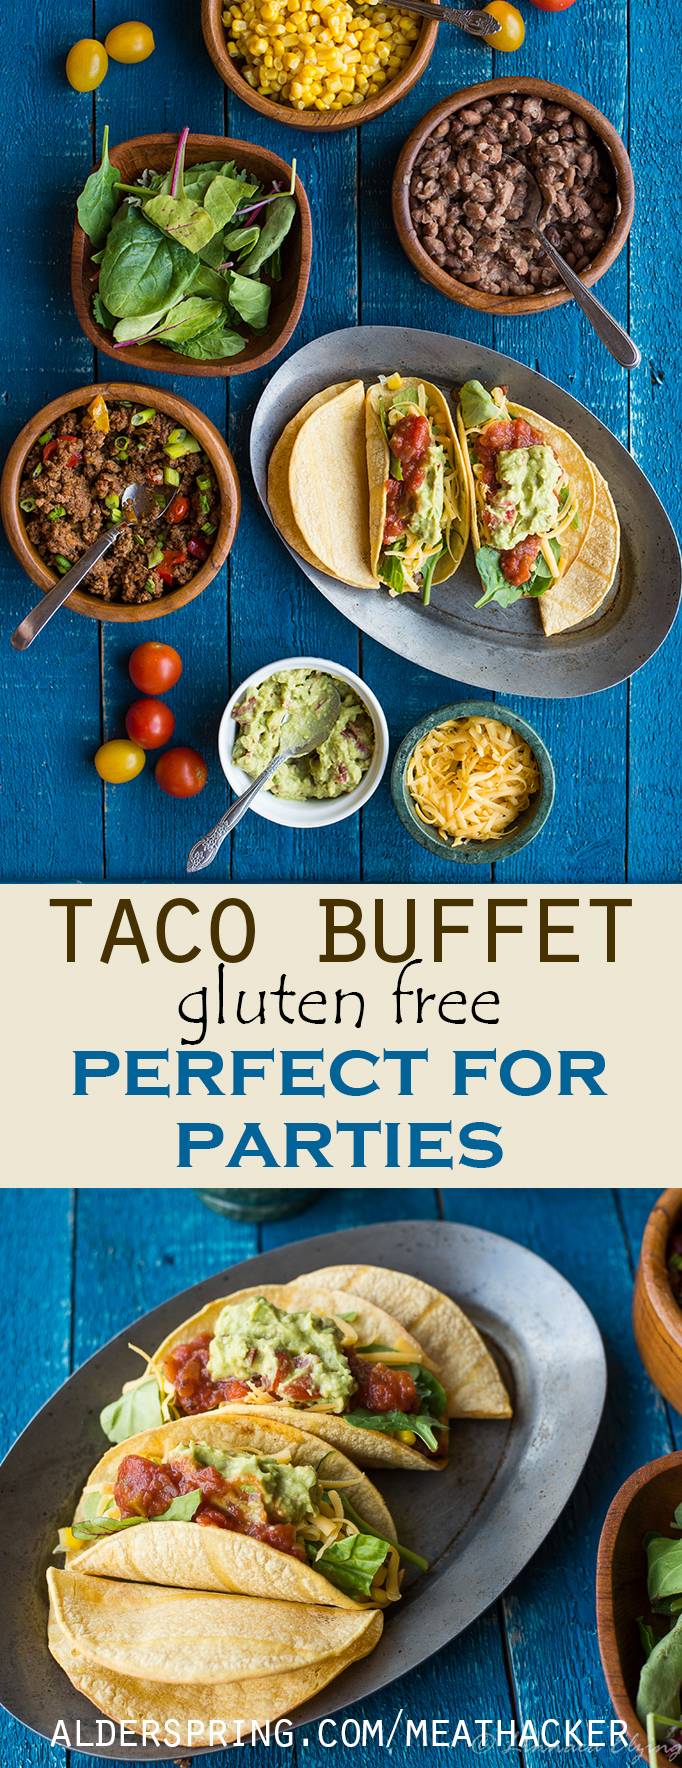 Ground beef taco recipe and how to make taco shells from soft corn tortillas--Gluten Free!